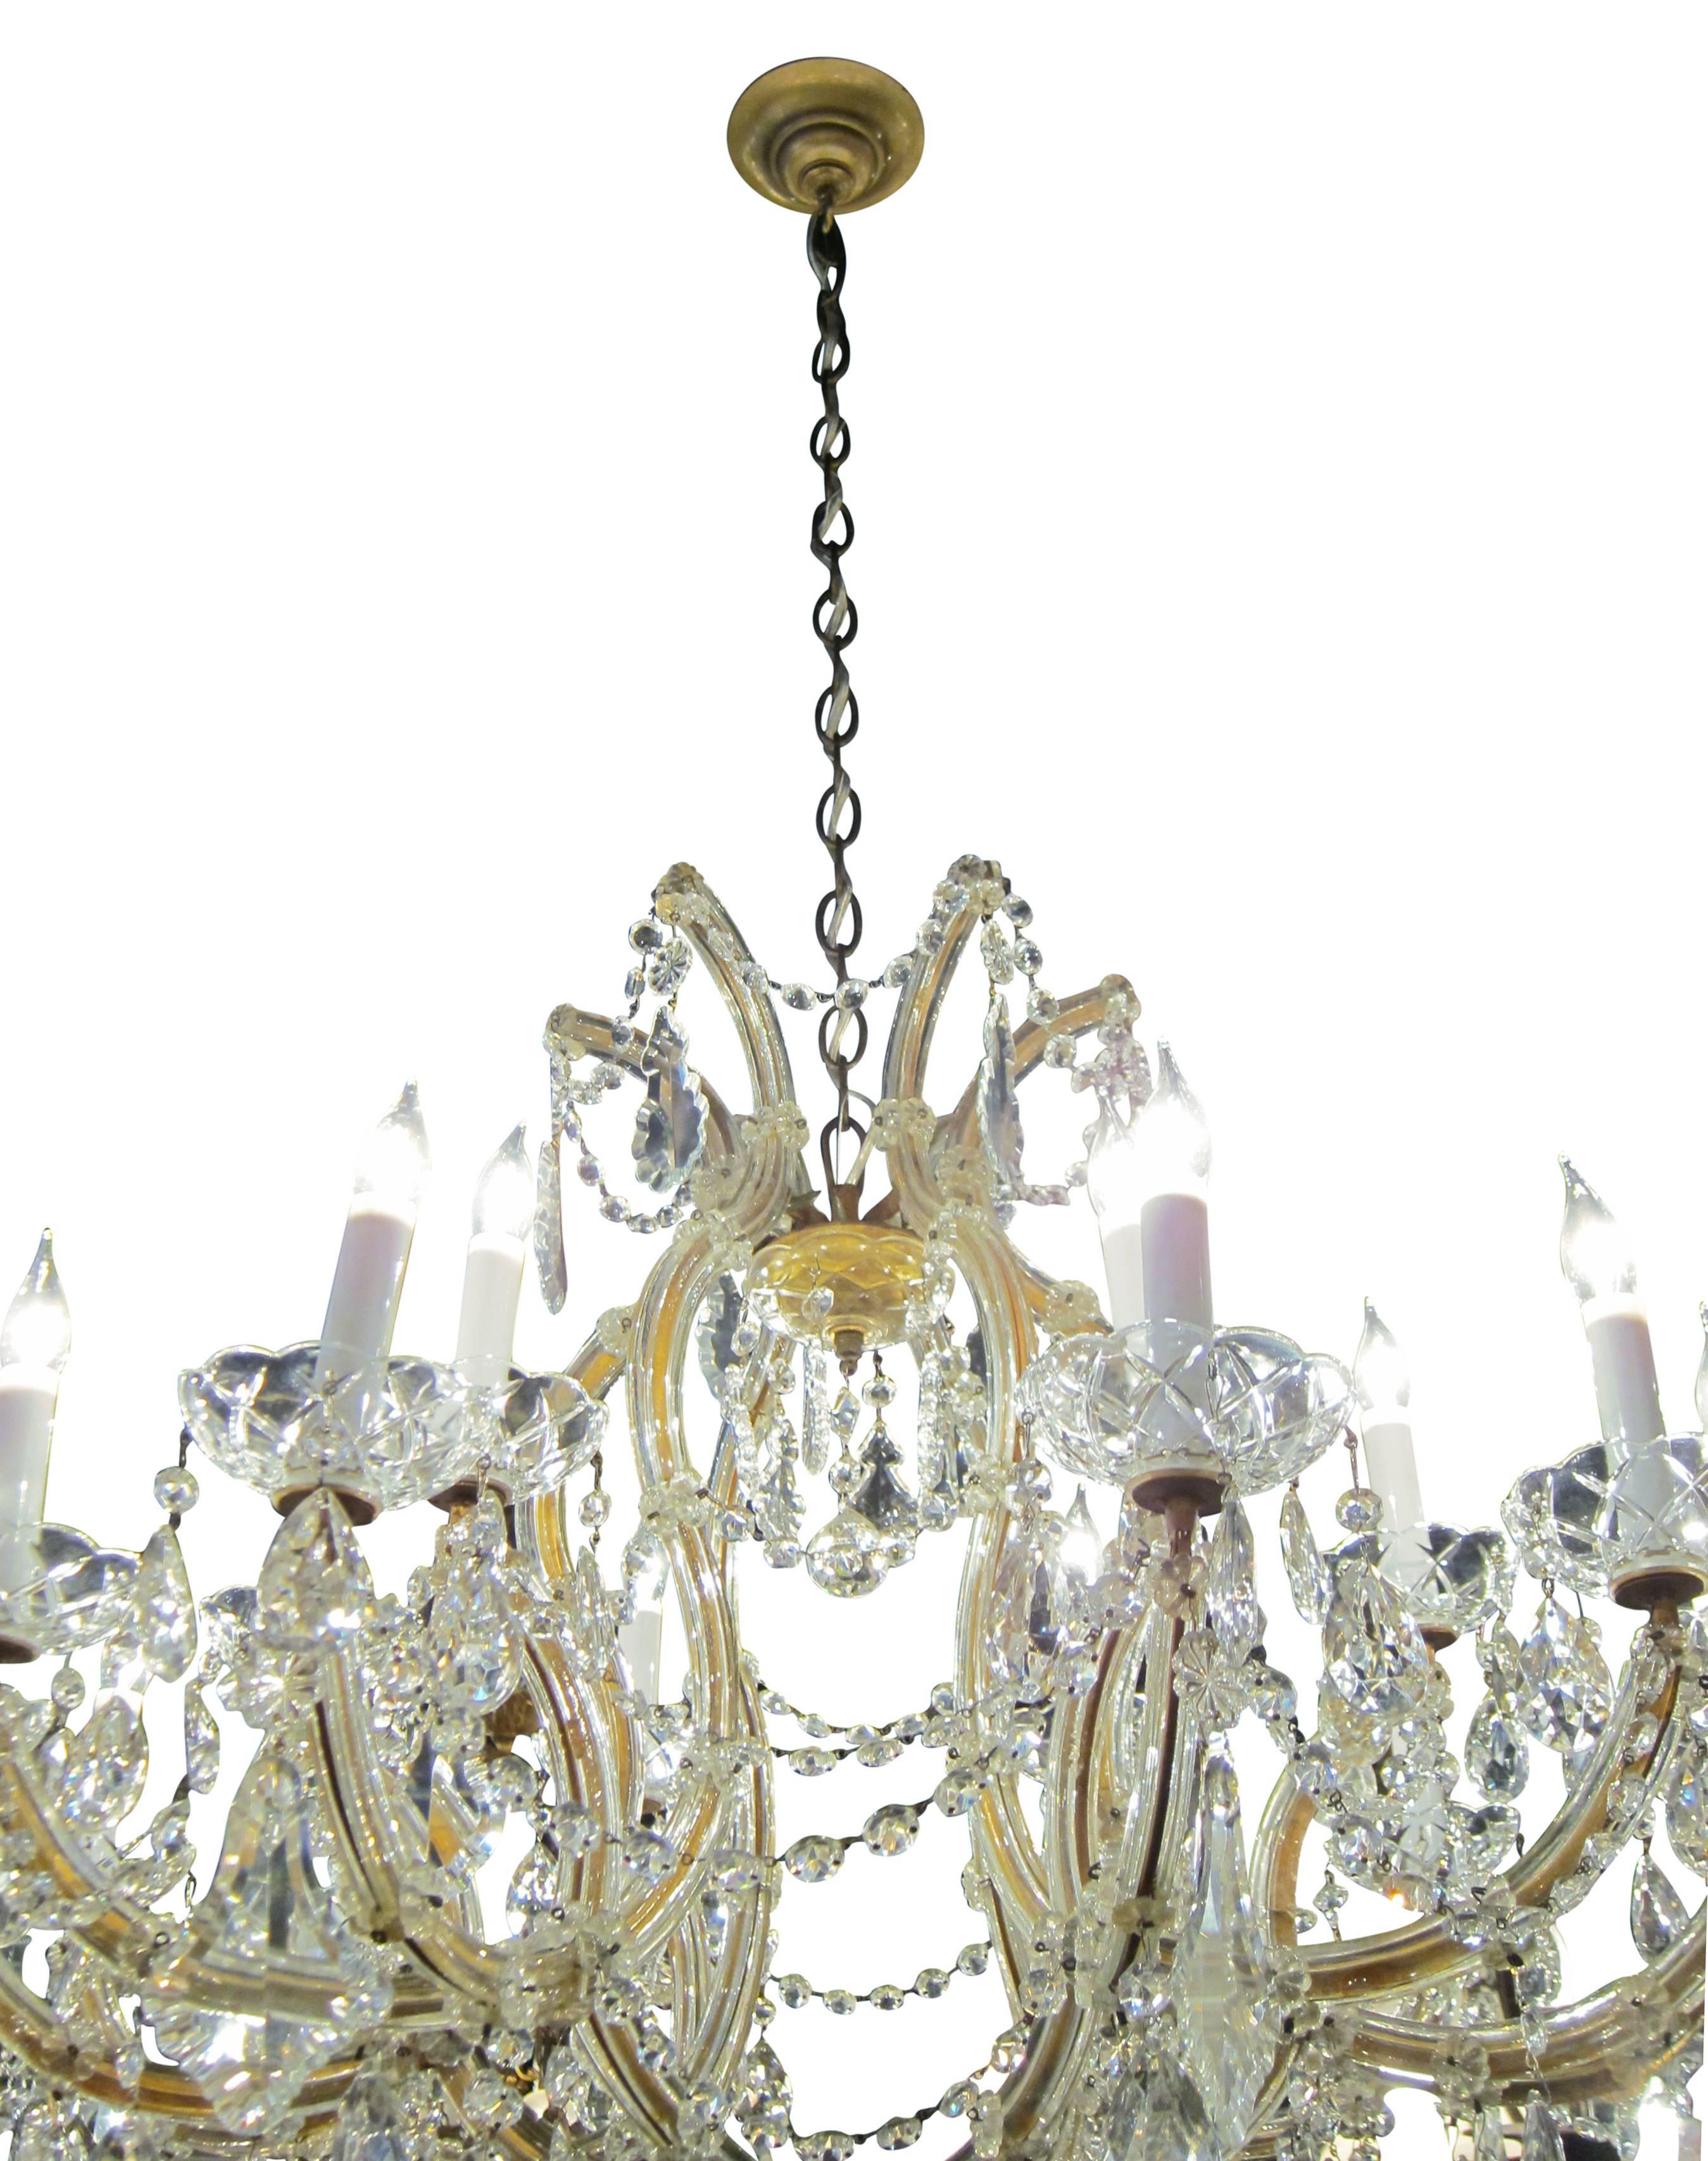 American 1940s Marie Therese Style Large Crystal Chandelier with 18 Lights